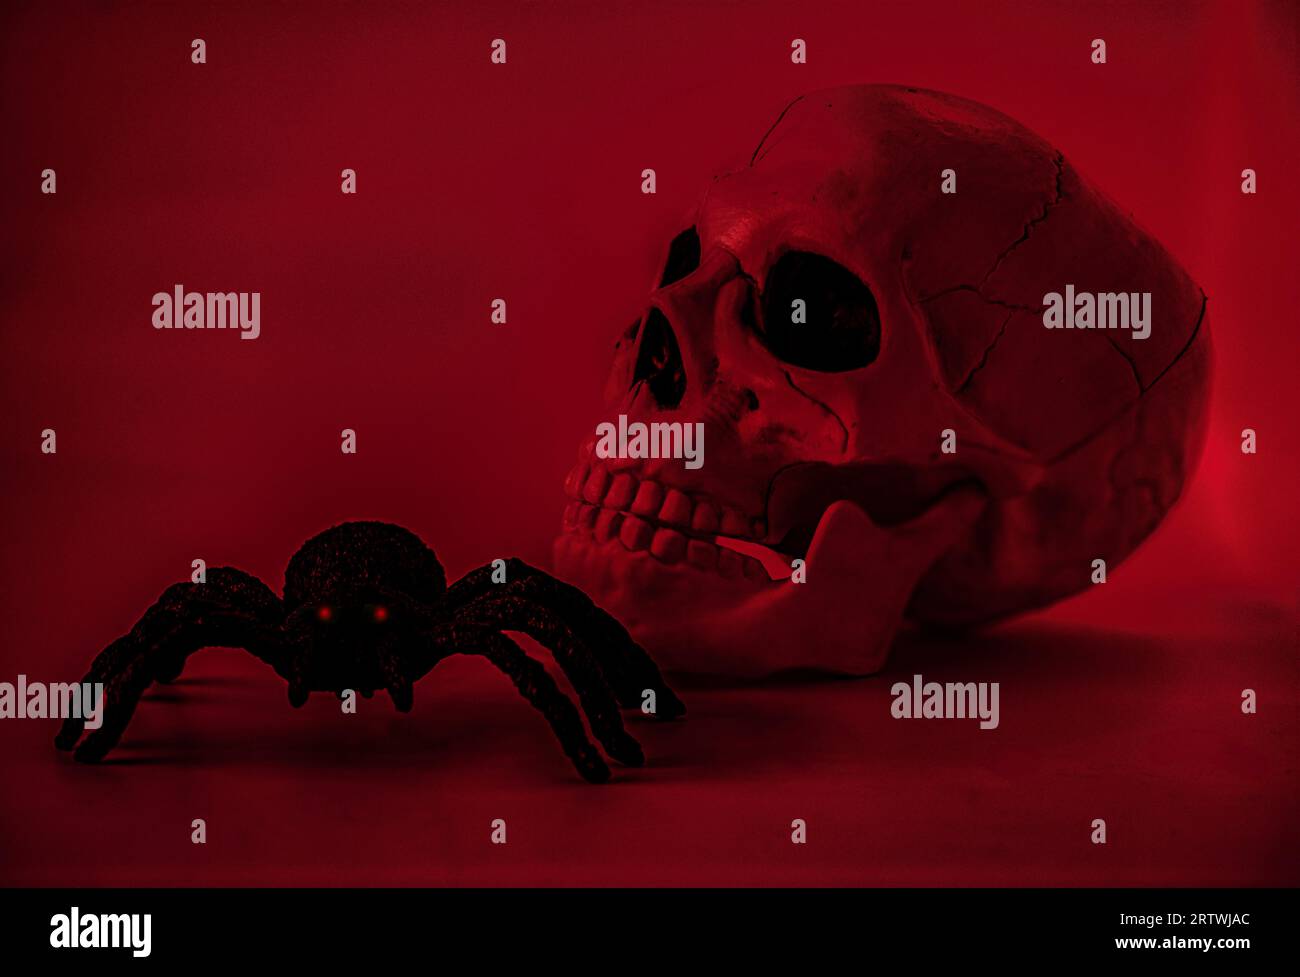 Scull and spider on a red background. Stock Photo